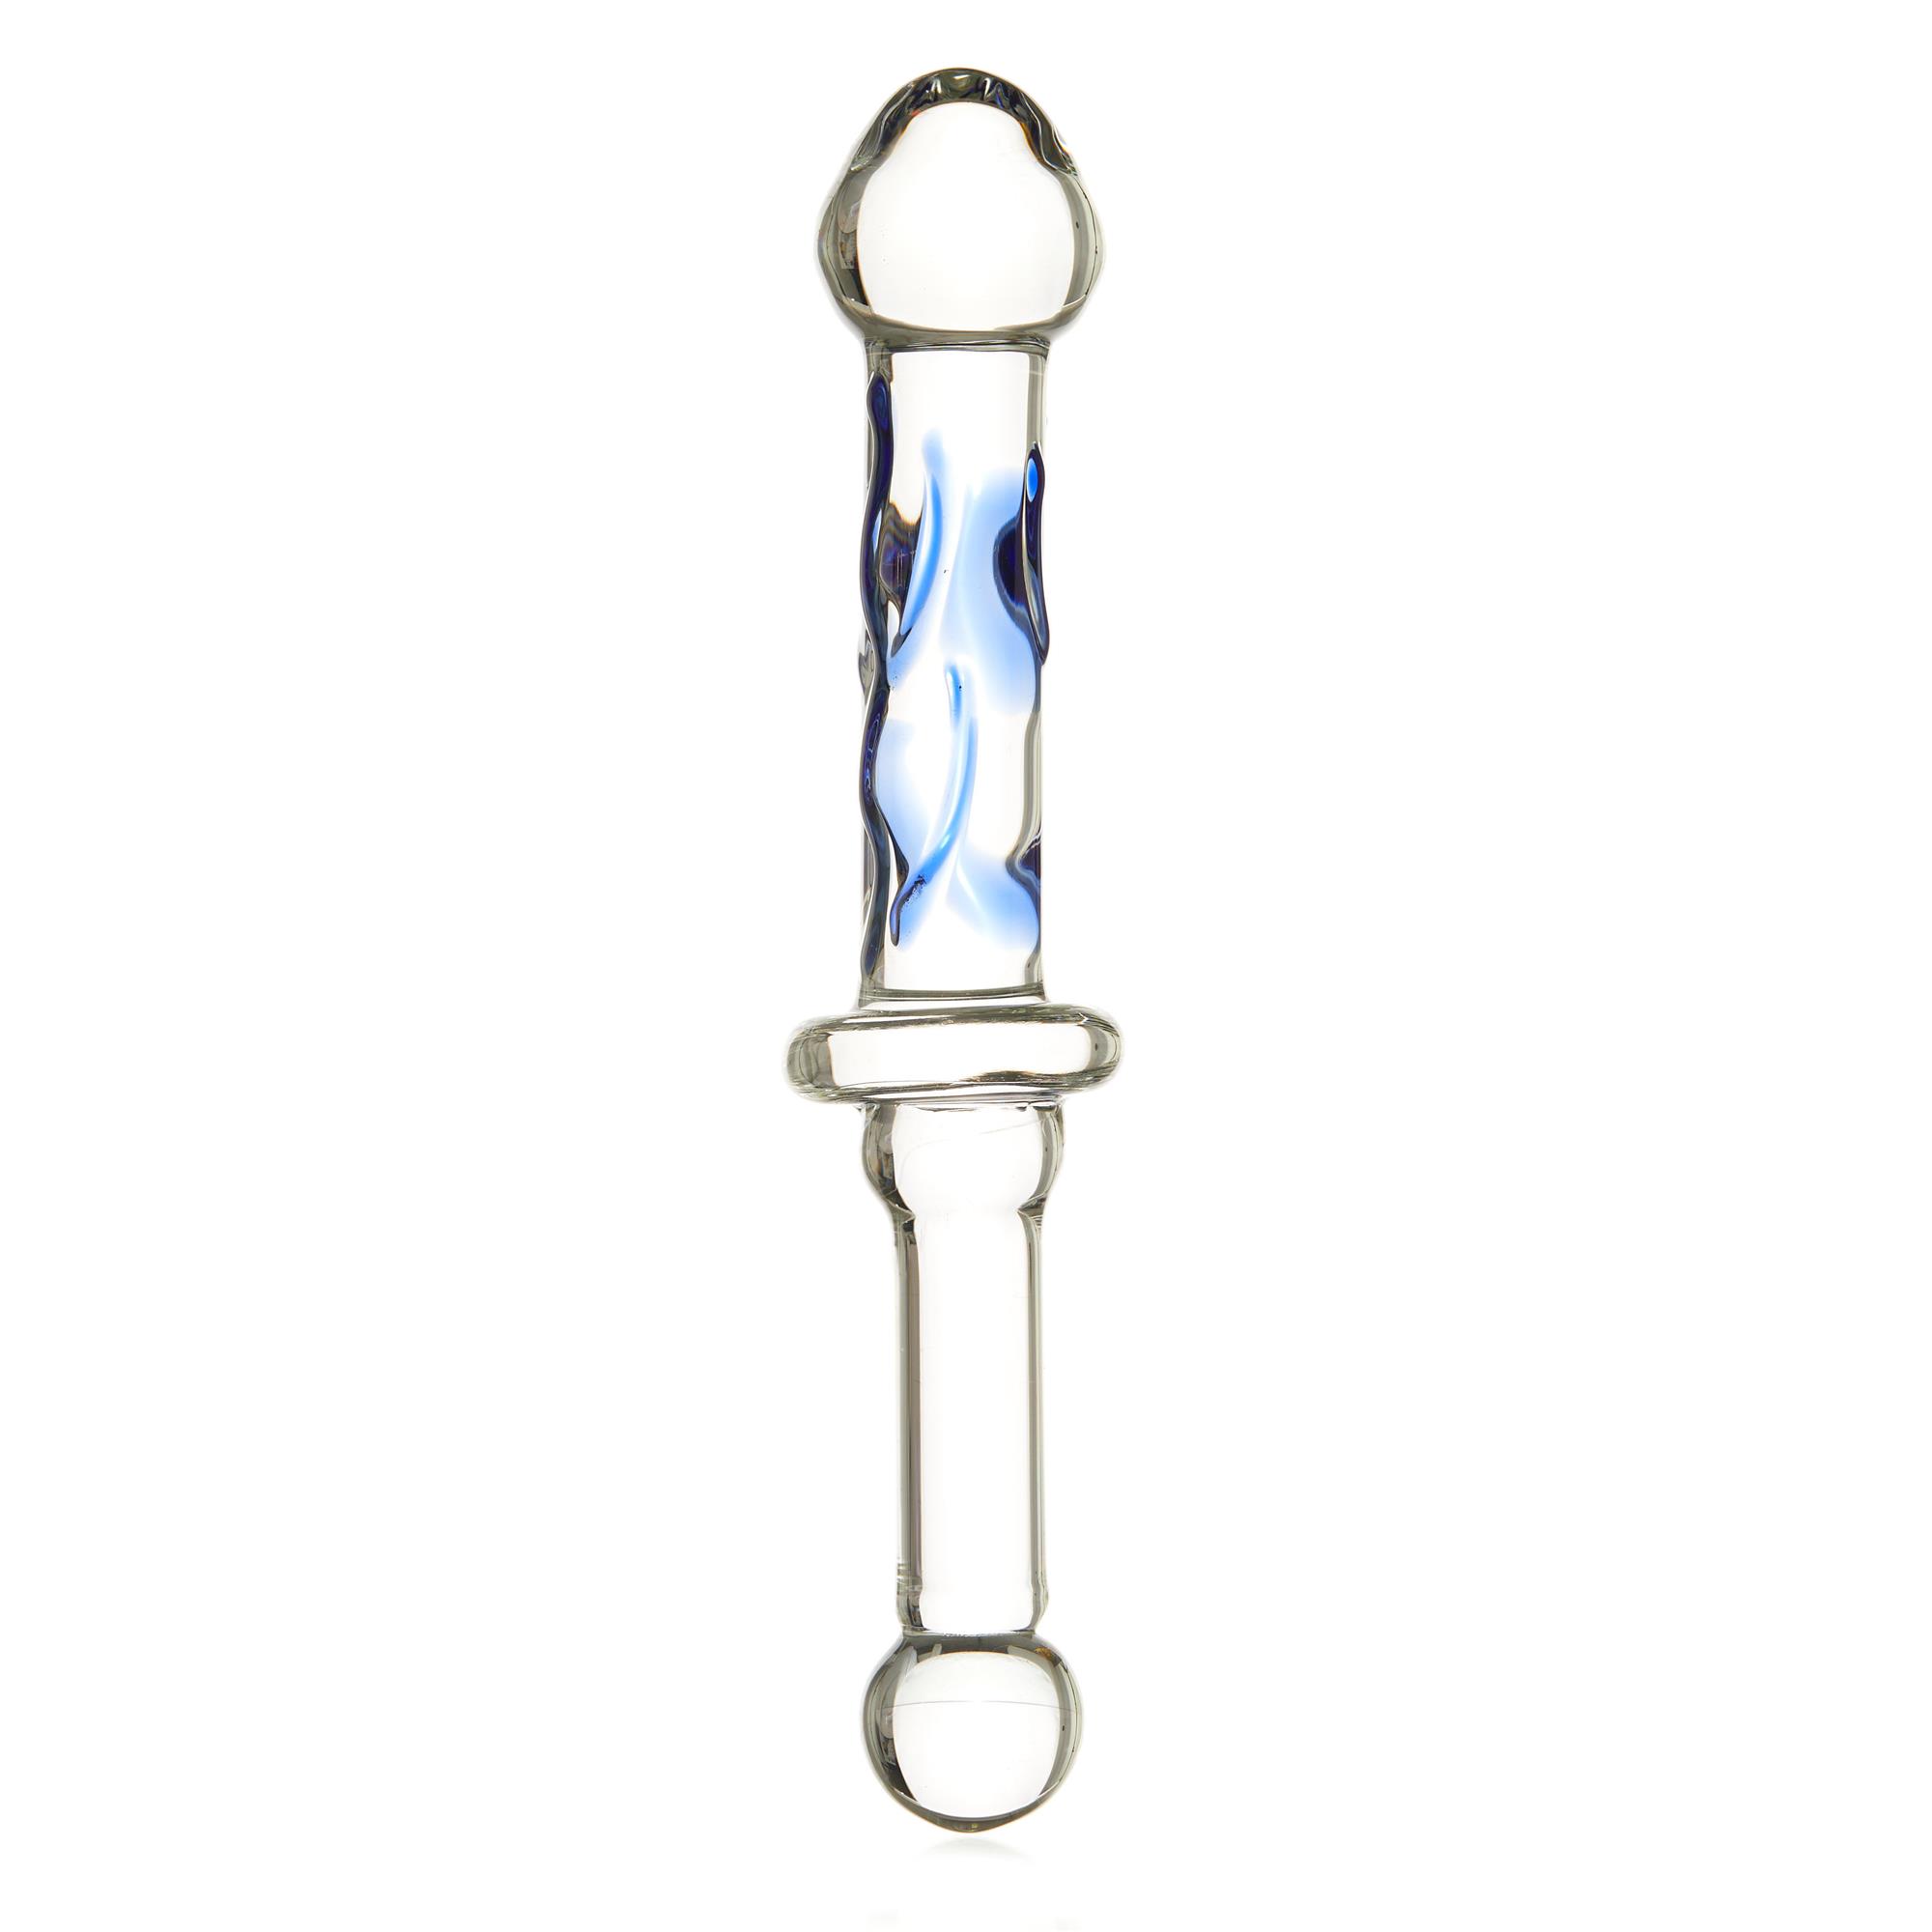 THE MAGIC STICK DOUBLE-SIDED GLASS DILDO